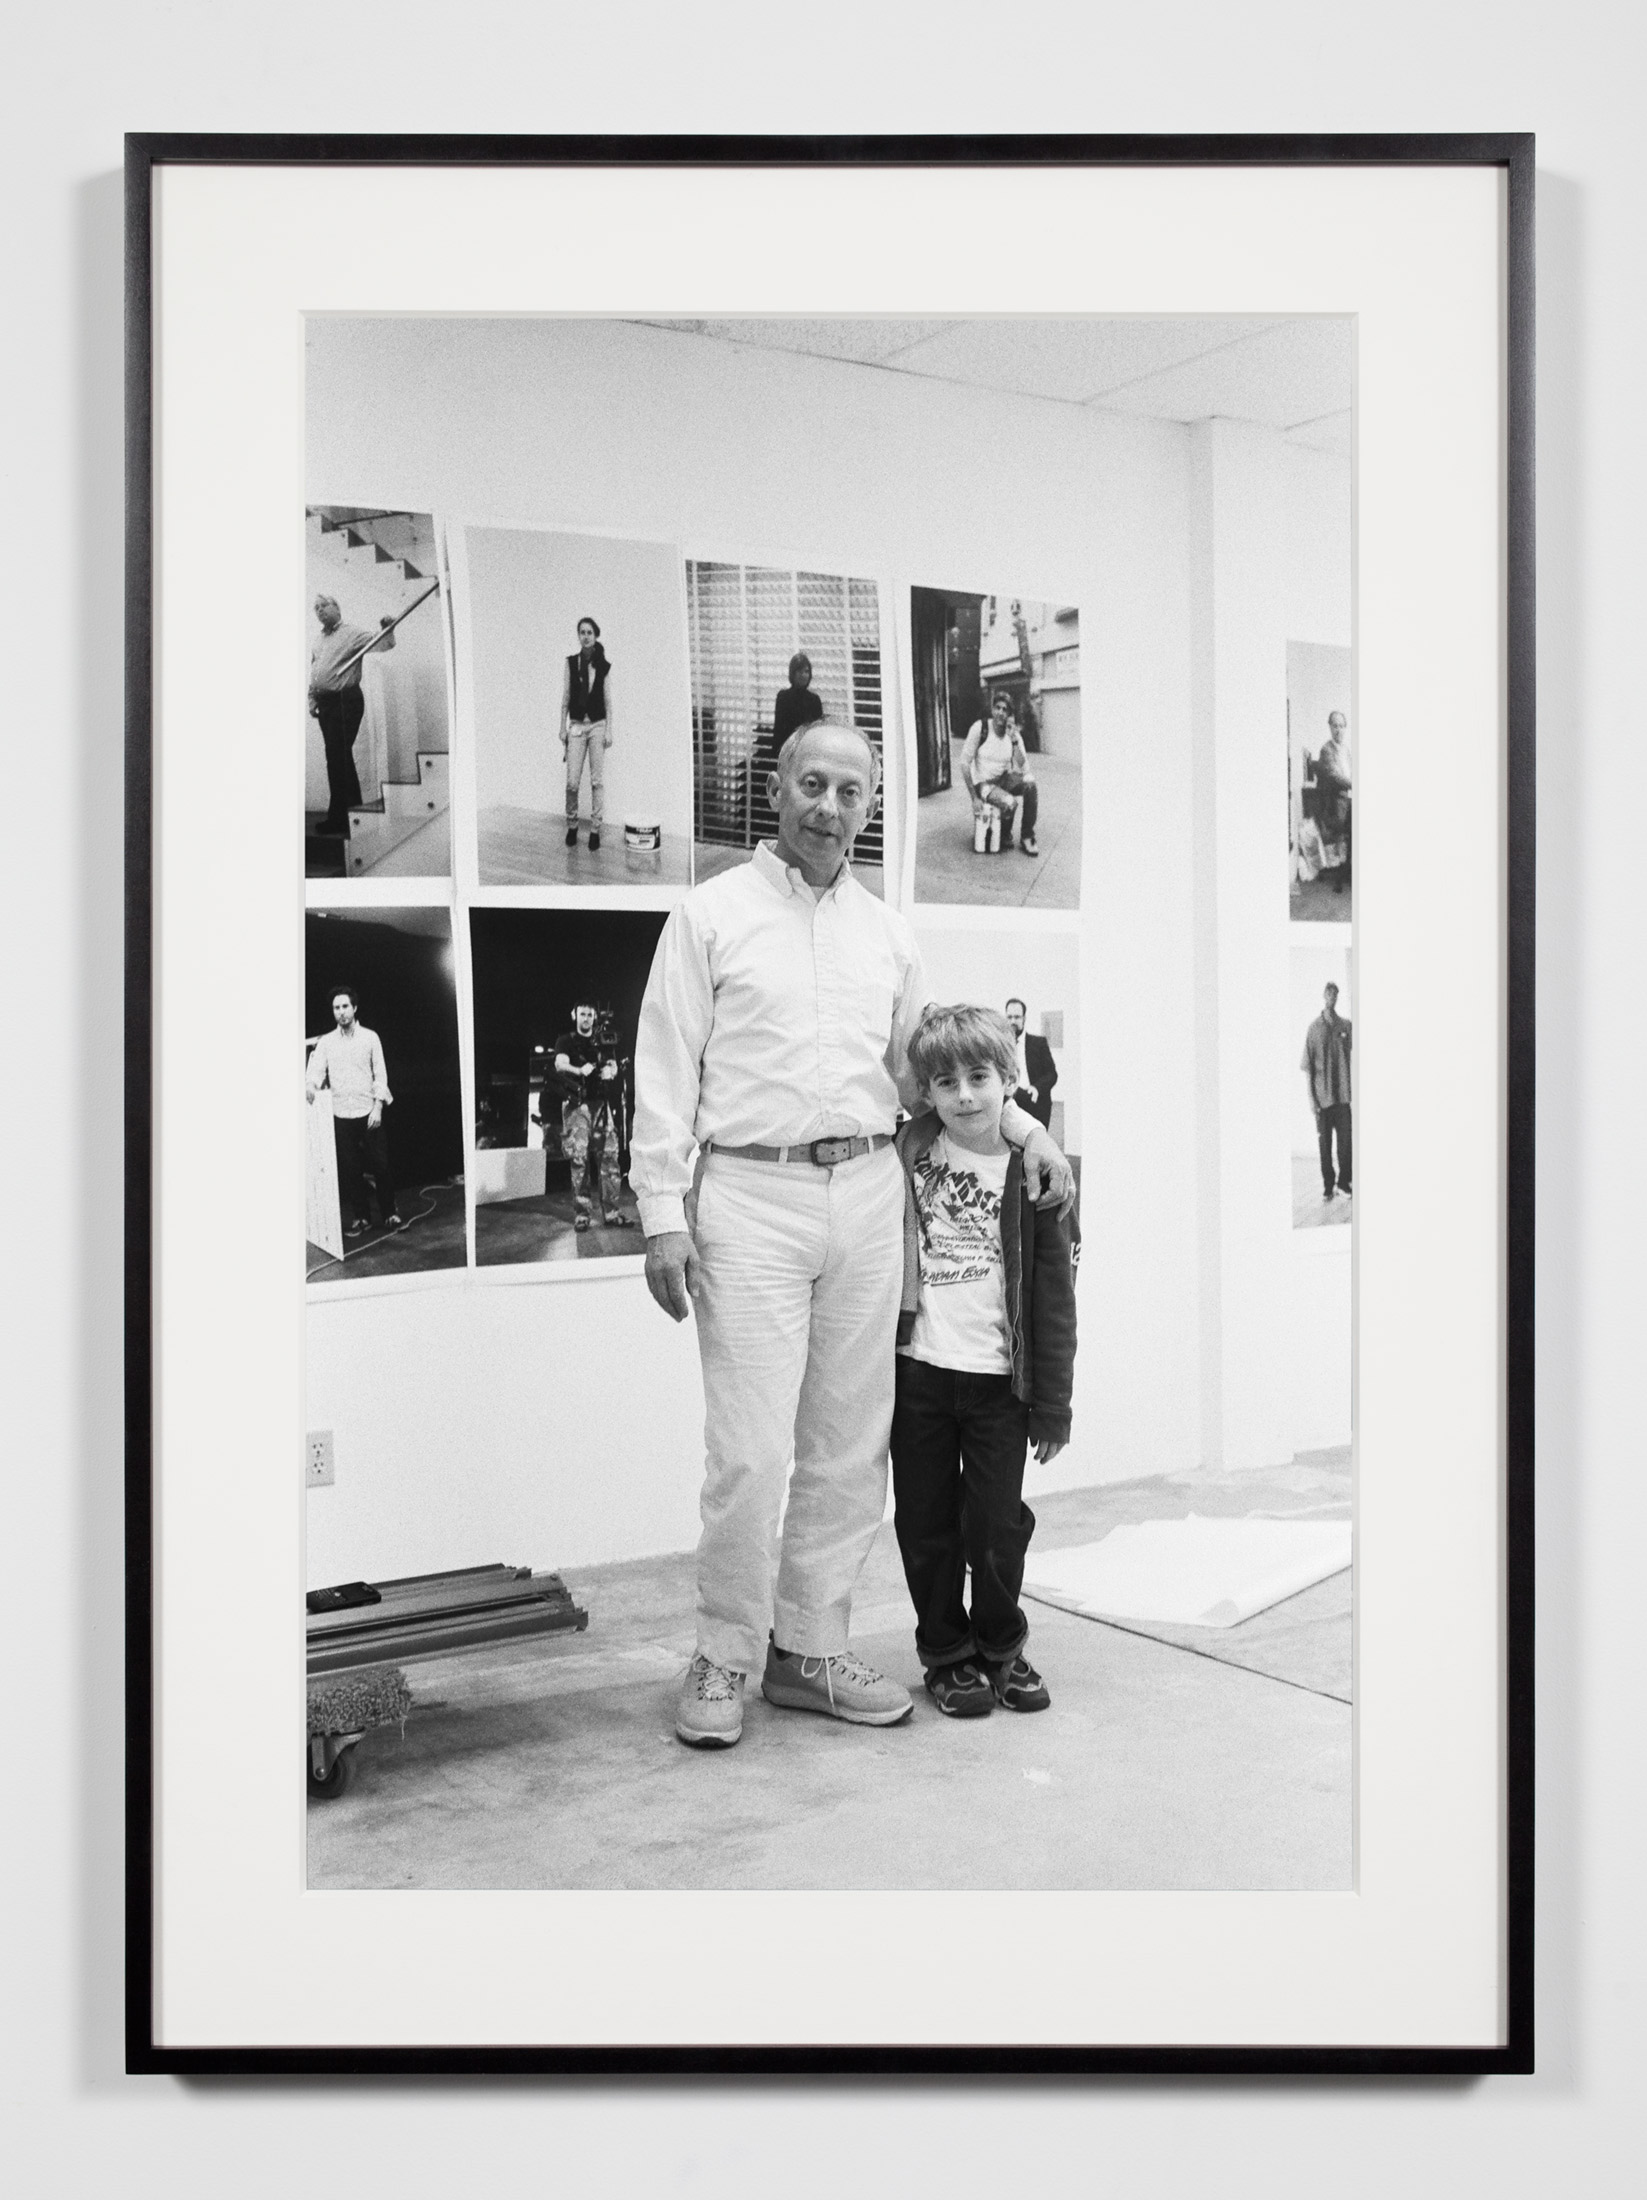   Publisher with Son, Los Angeles, California, April 3, 2009    2011   Epson Ultrachrome K3 archival ink jet print on Hahnemühle Photo Rag paper  36 3/8 x 26 3/8 inches   Industrial Portraits, 2008–     